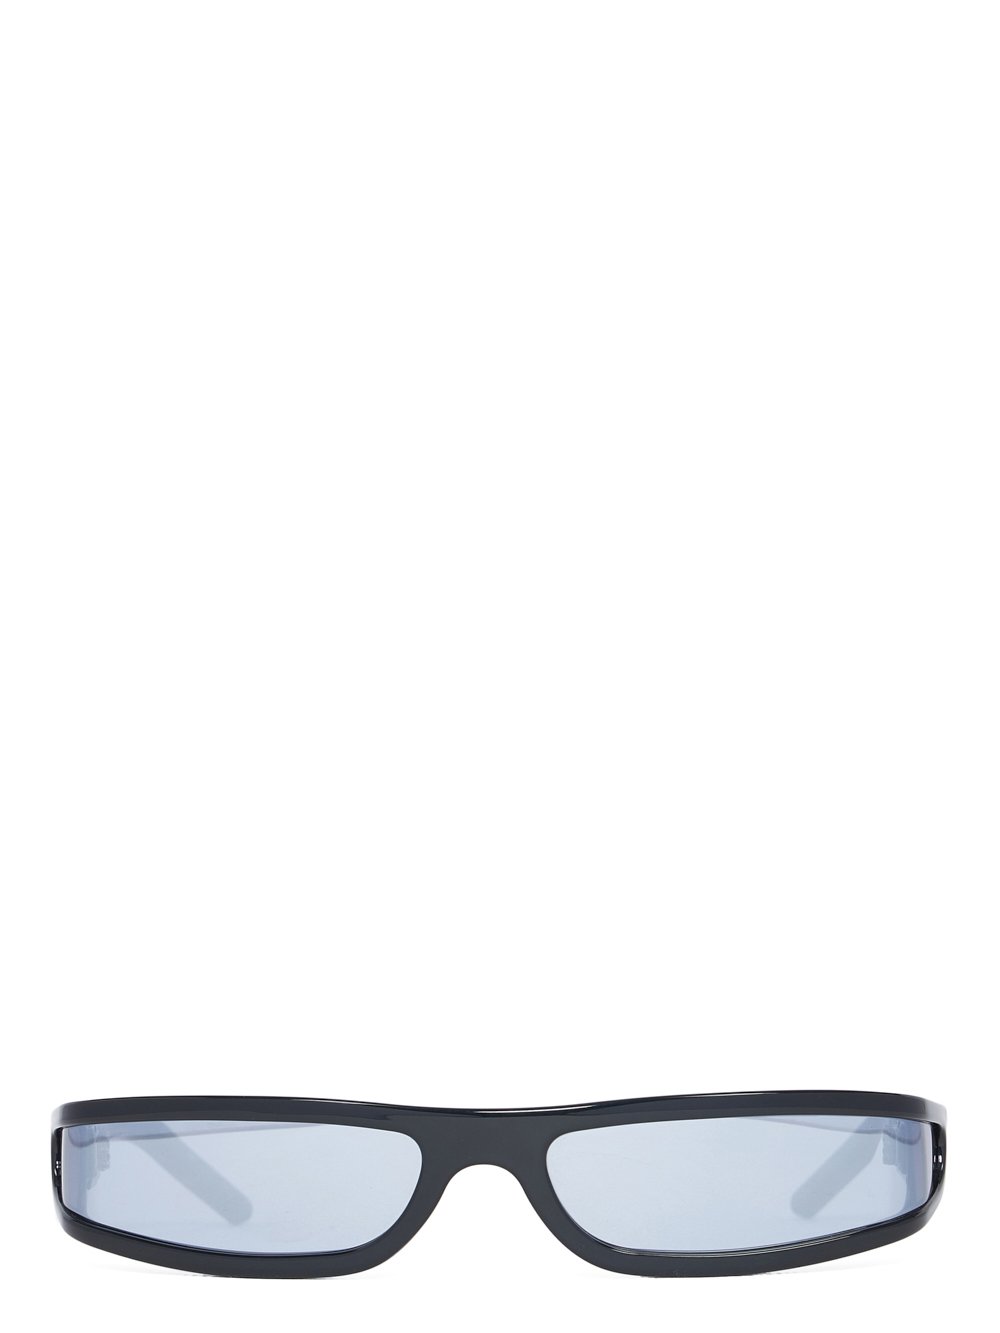 RICK OWENS FOG SUNGLASSES IN BLACK AND SILVER